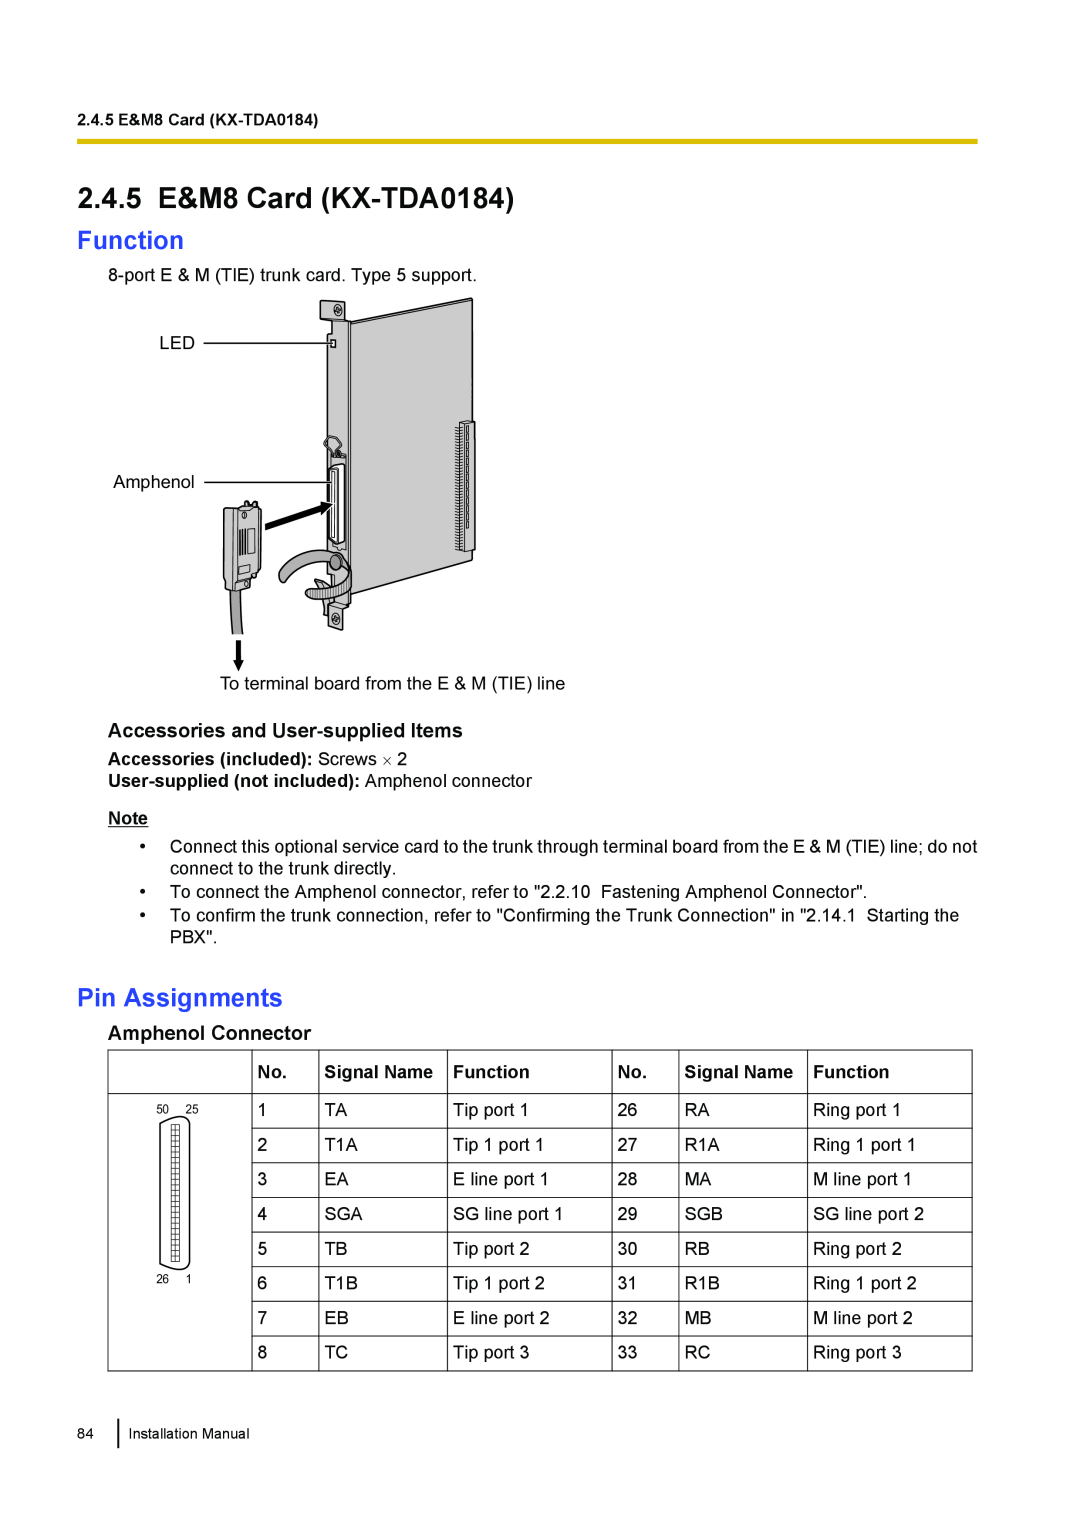 Panasonic KX-TDA100 2.4.5 E&M8 Card KX-TDA0184, Function, Pin Assignments, Accessories and User-supplied Items 